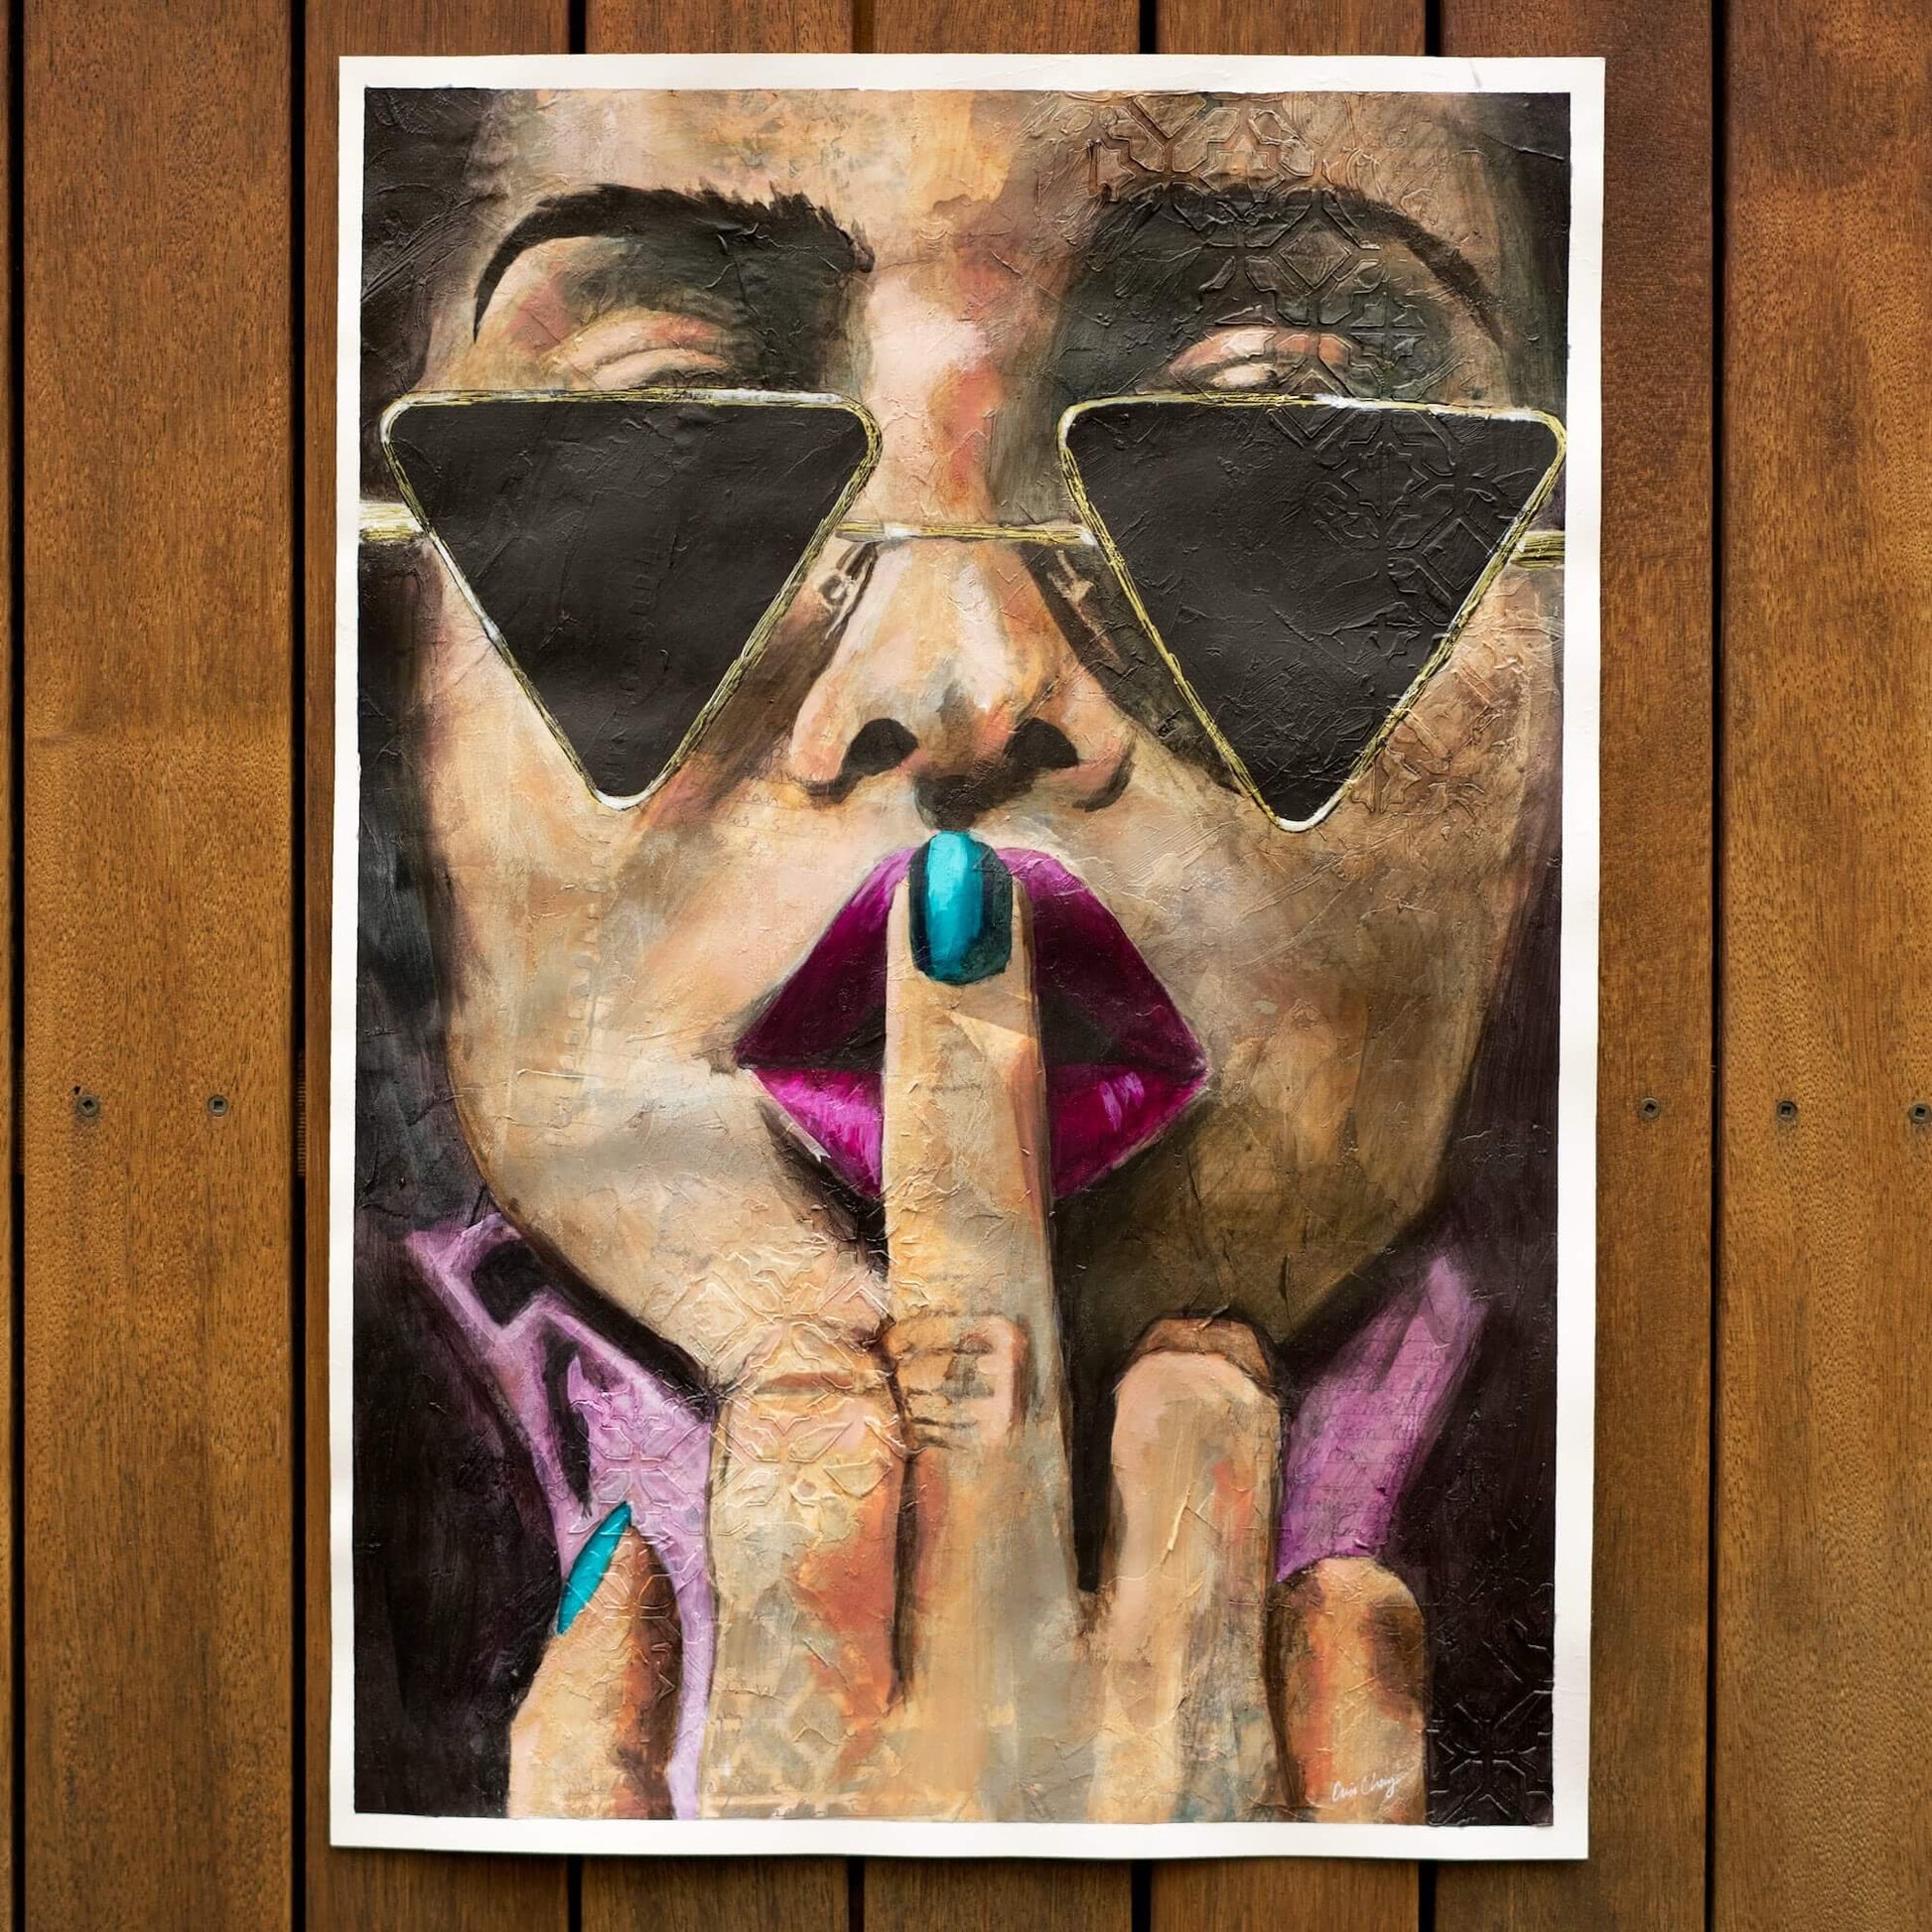 Artworks for Sale – A2 Painting of Woman Flipping Off – Brown & Purple - Collage Art – 'Shhh' – Art Wall Painting by Criss Chaney